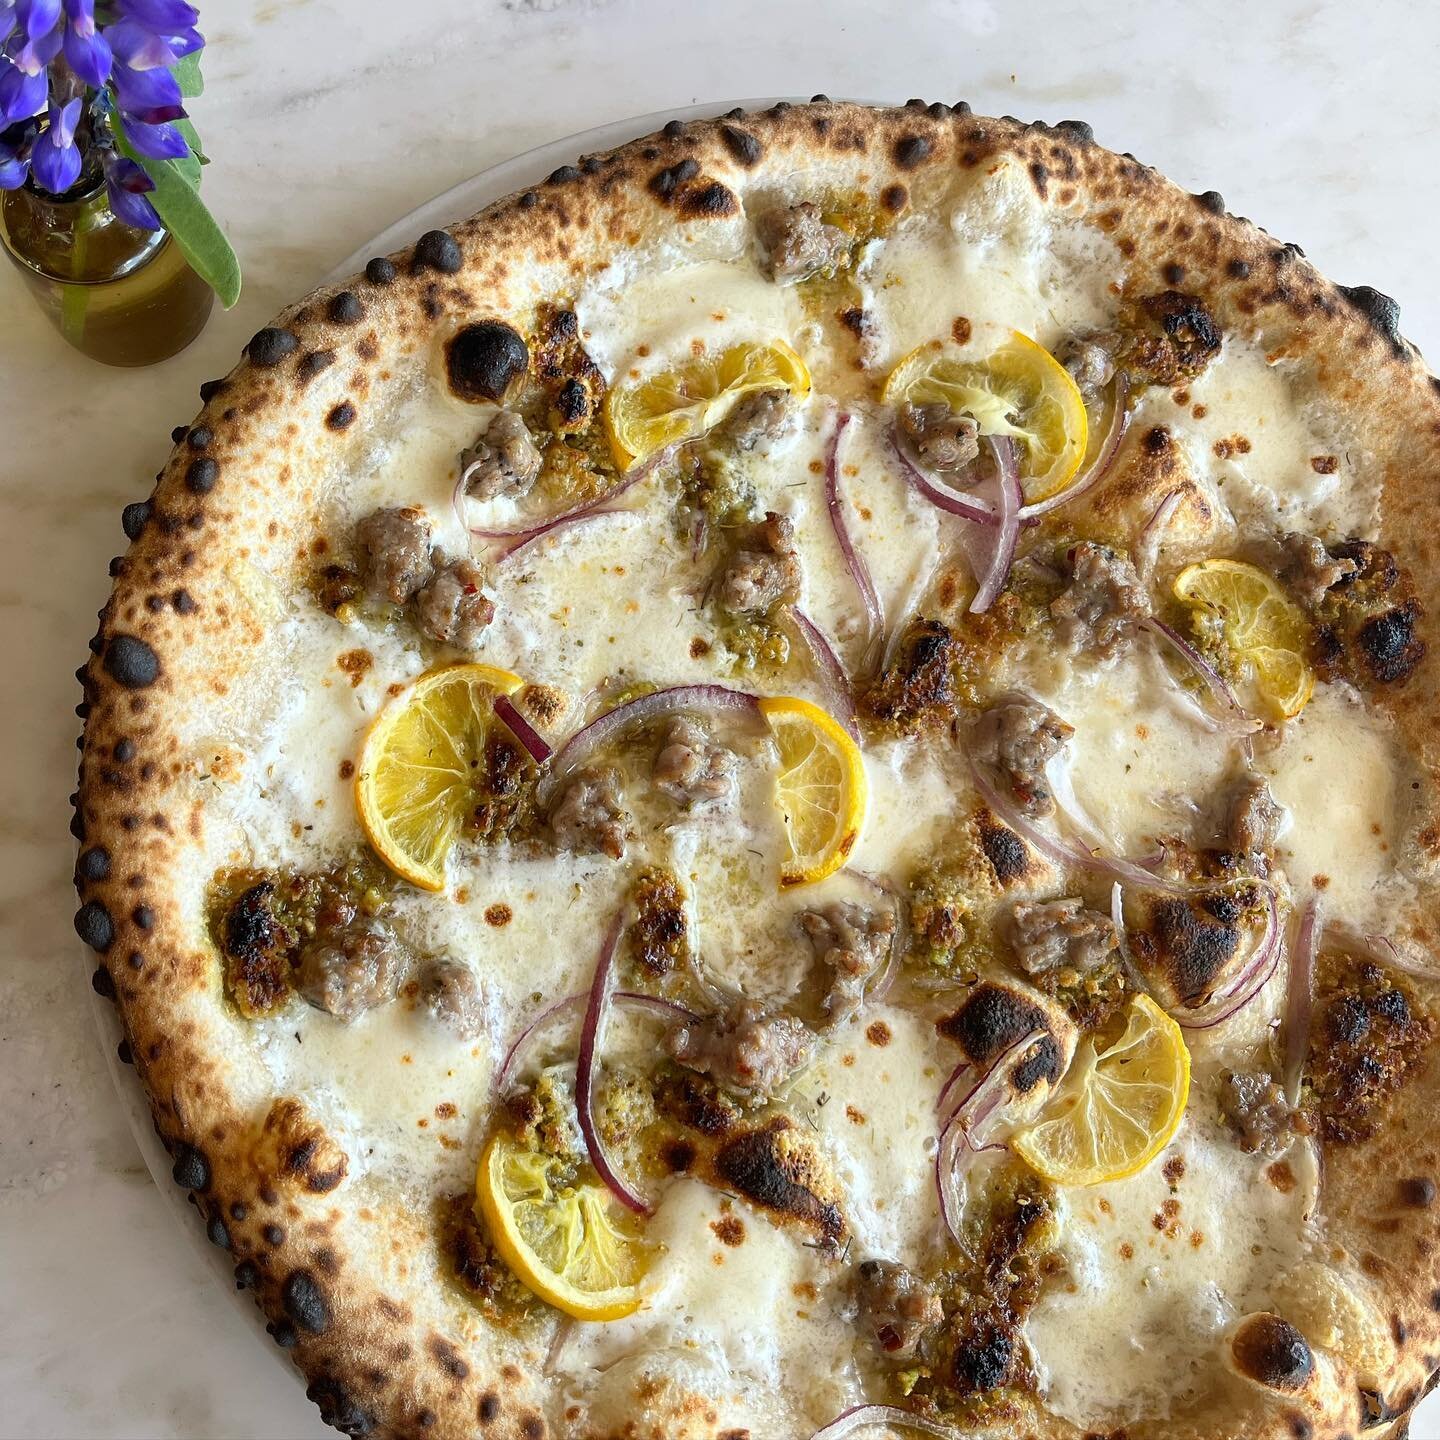 Gorgeous Meyer Lemon pizza is officially back on the menu with @rincontropics meyers, @casitasvalleypastures house sausage, red onion and pistachio paste. See you at 11:30am! 👨&zwj;🍳 @vicariouslyjosh @ed.uard.oo @sadisticshark @despera.sean